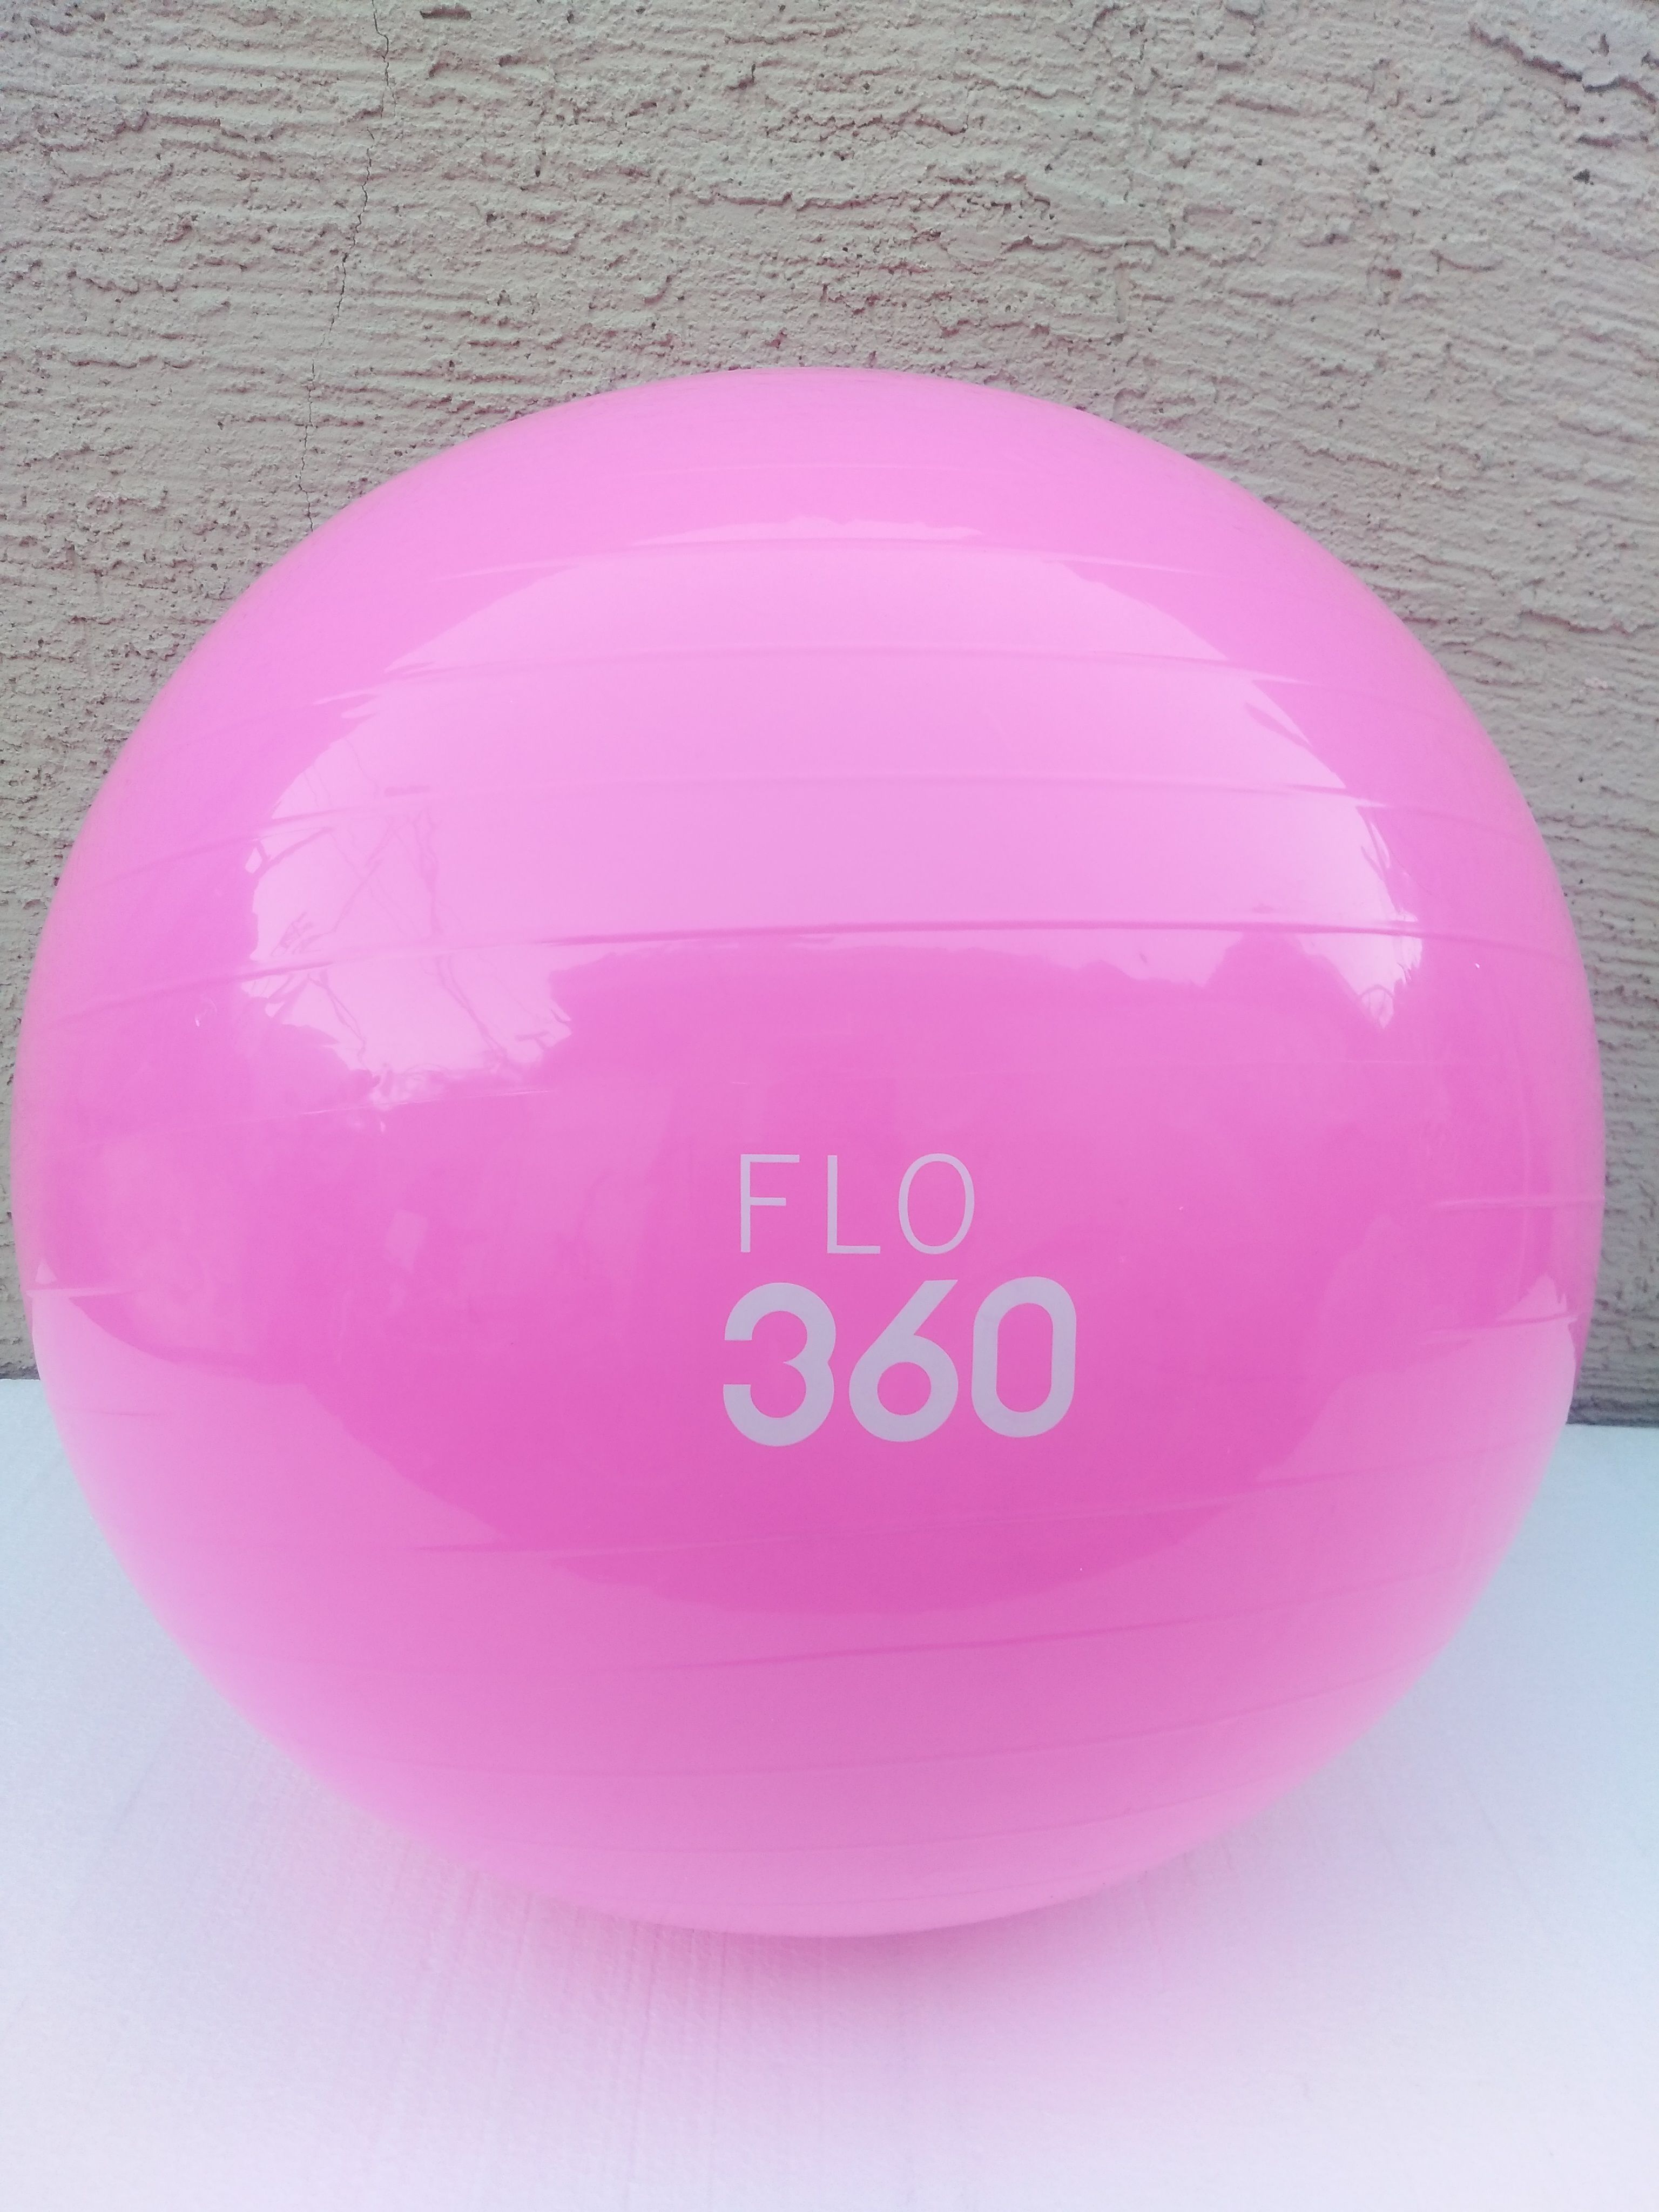 FLO 360 PINK EXERCISE & YOGA BALL !!! for Sale in Las Vegas, NV - OfferUp